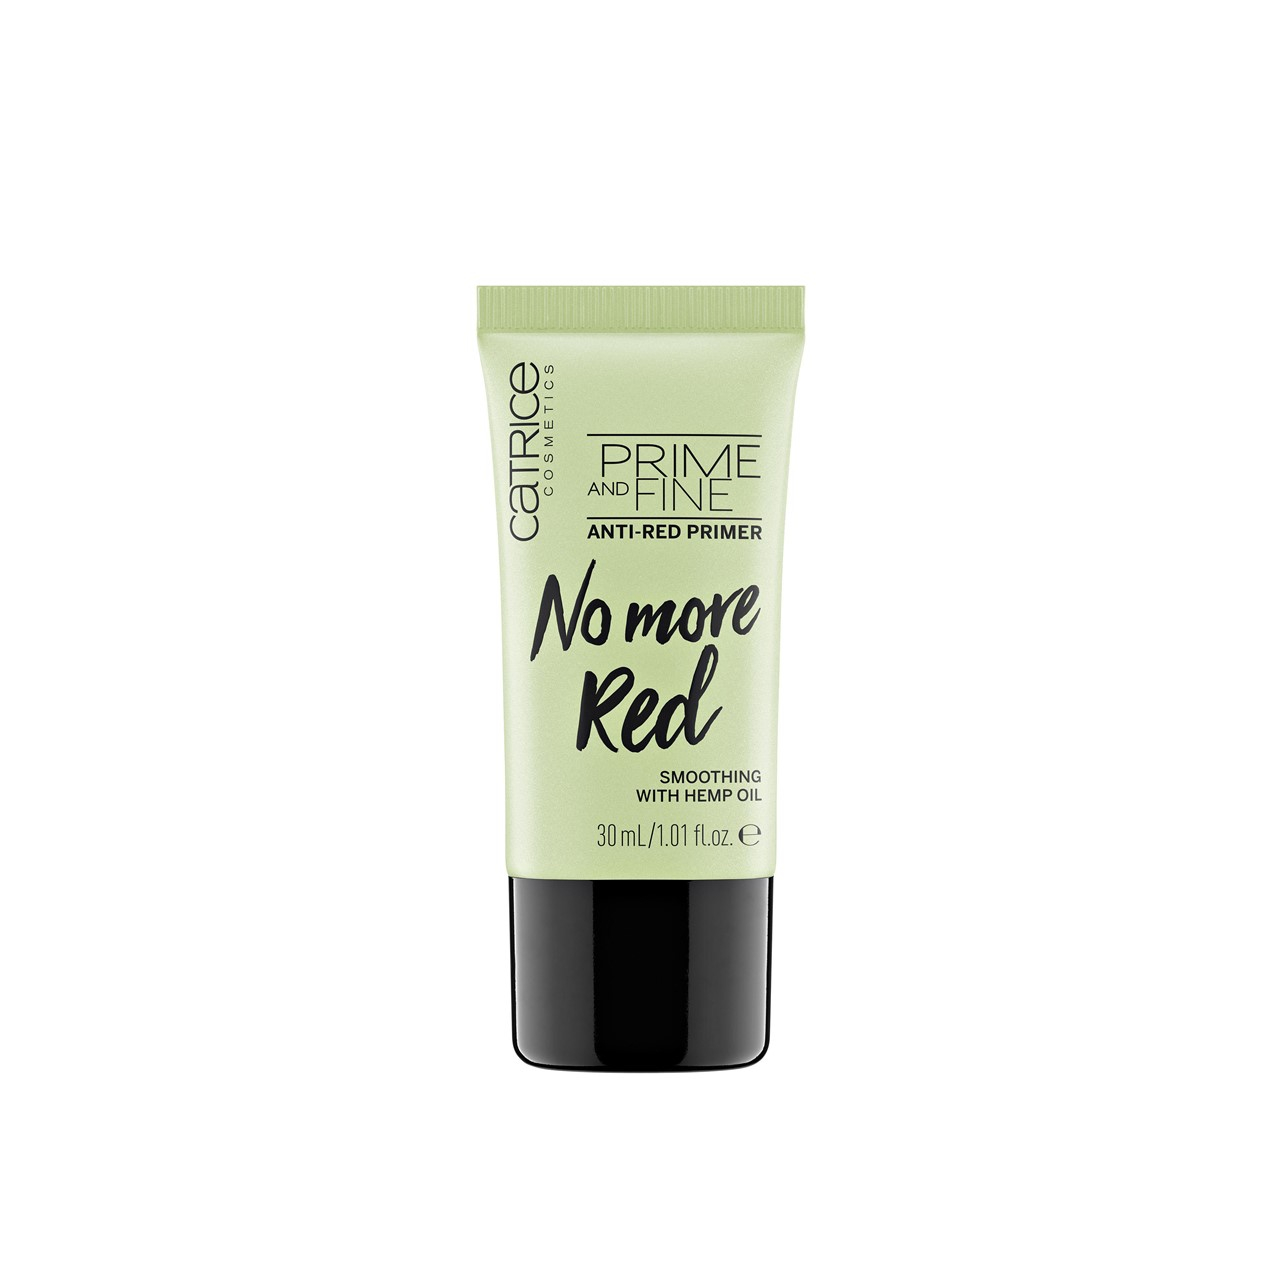 Buy Catrice Prime And Fine · 30ml Primer More Anti-Red Red No Greenland